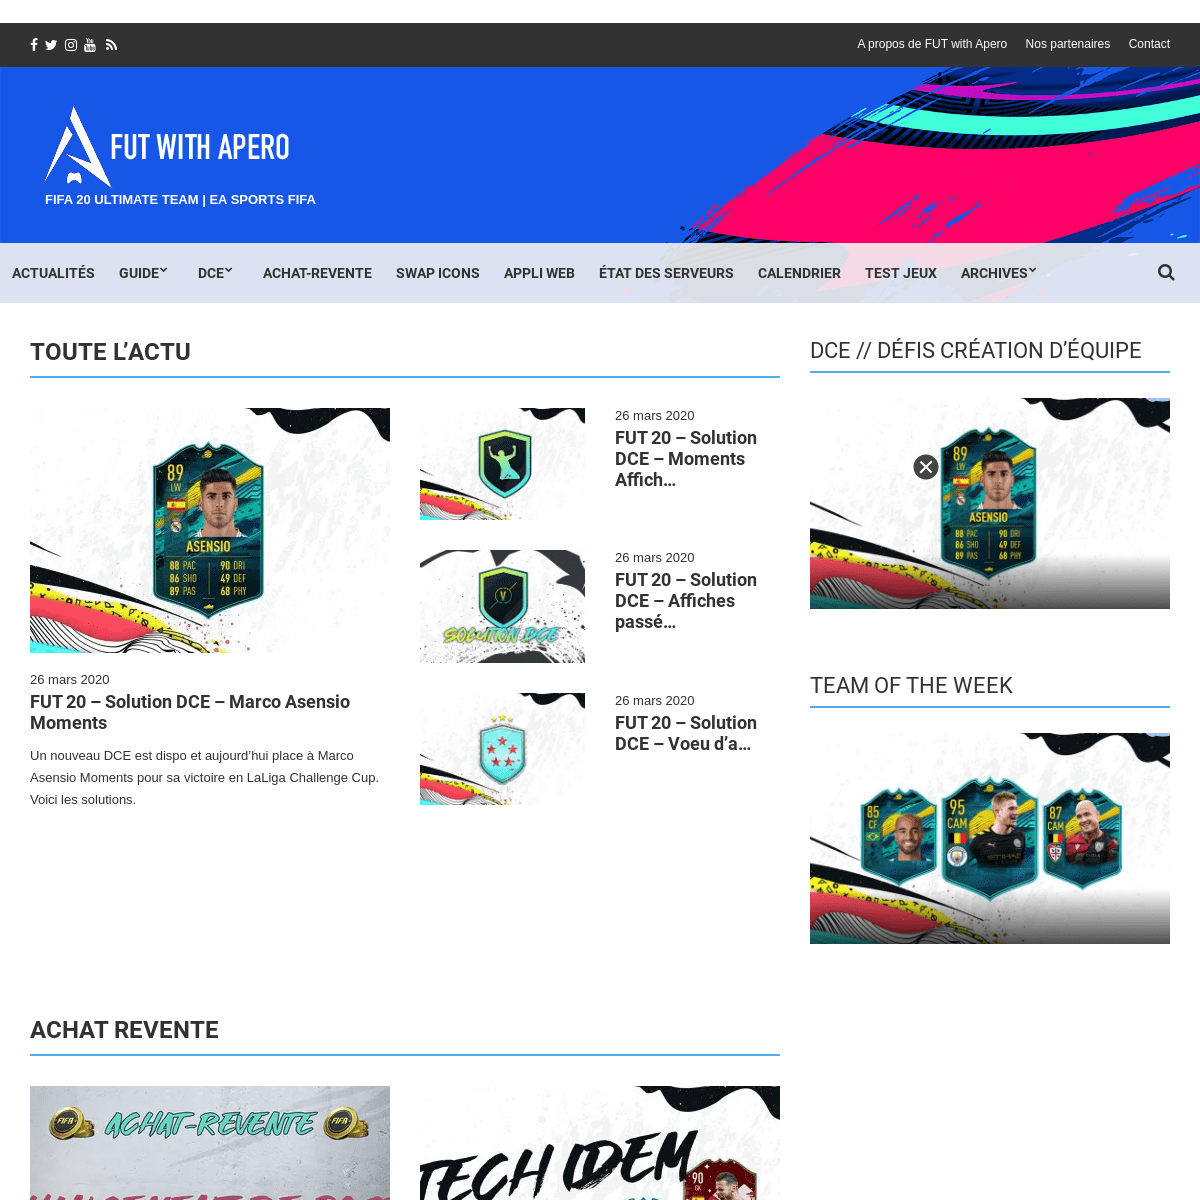 A complete backup of futwithapero.com